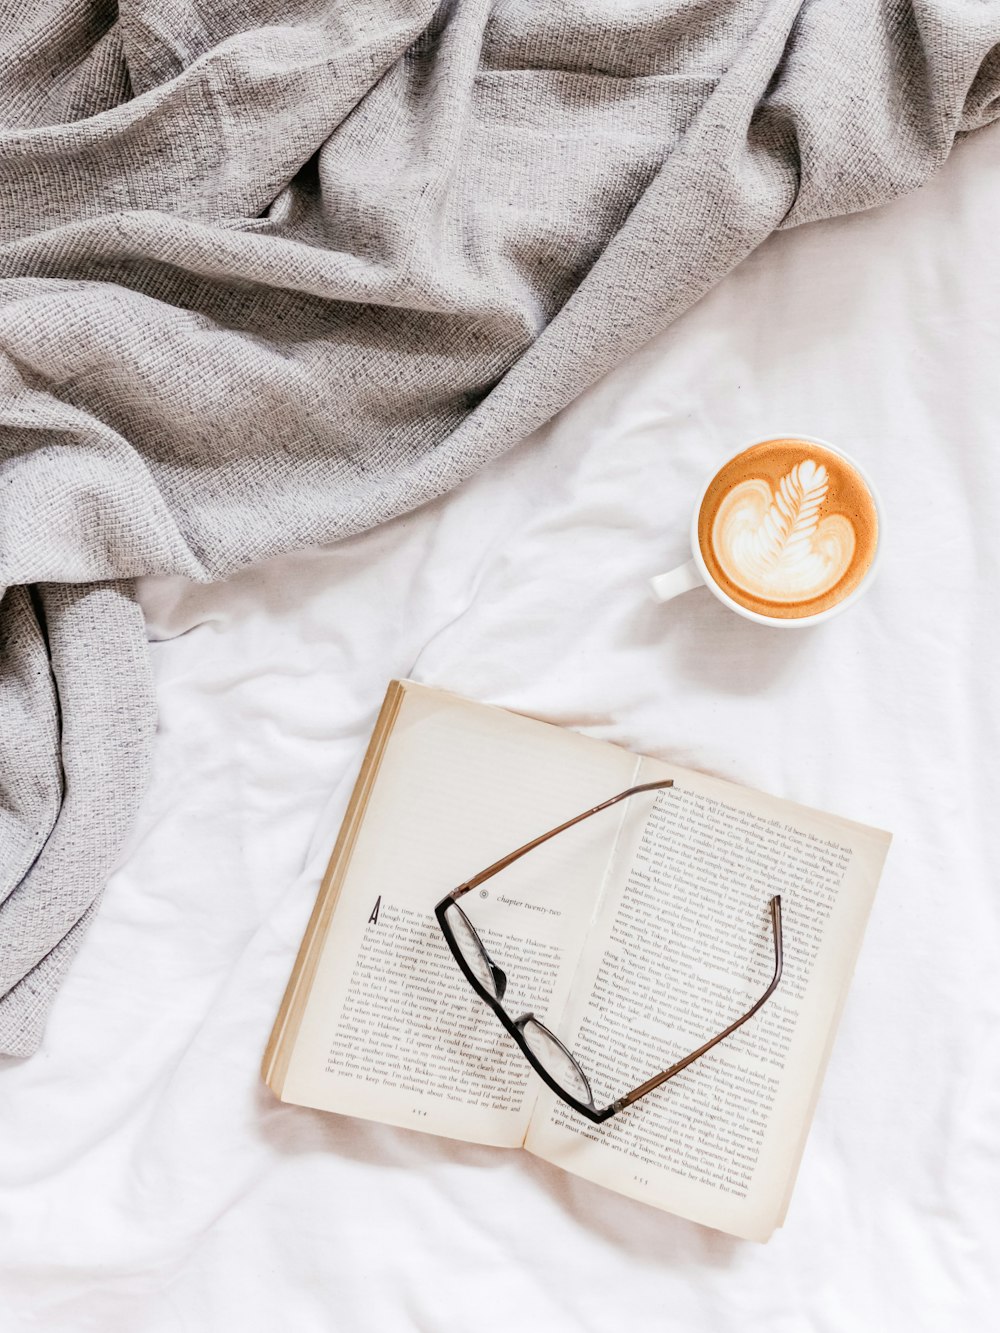 flat lay photography of eyeglasses on top of open book beside cup of coffee late